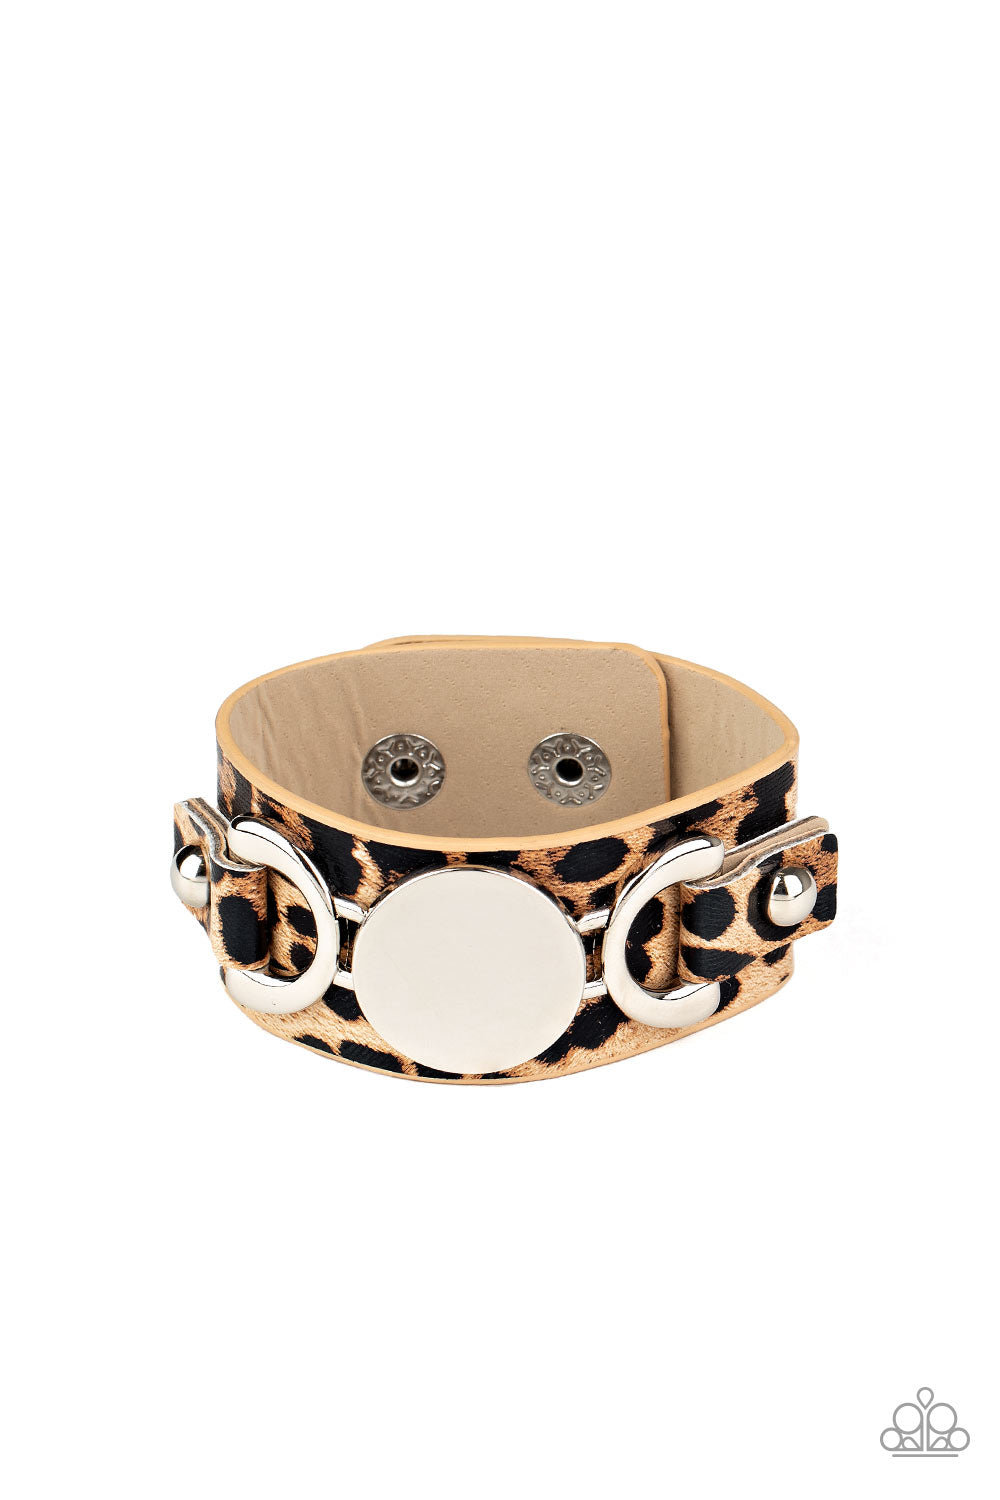 &lt;P&gt;A silver buckle-like centerpiece is studded in place across the front of a thick leather band painted in brown cheetah print. Features an adjustable snap closure.&lt;/P&gt;  

&lt;P&gt; &lt;I&gt;Sold as one individual bracelet.&lt;/I&gt;  &lt;/P&gt;


&lt;img src=\&quot;https://d9b54x484lq62.cloudfront.net/paparazzi/shopping/images/517_tag150x115_1.png\&quot; alt=\&quot;New Kit\&quot; align=\&quot;middle\&quot; height=\&quot;50\&quot; width=\&quot;50\&quot;/&gt;